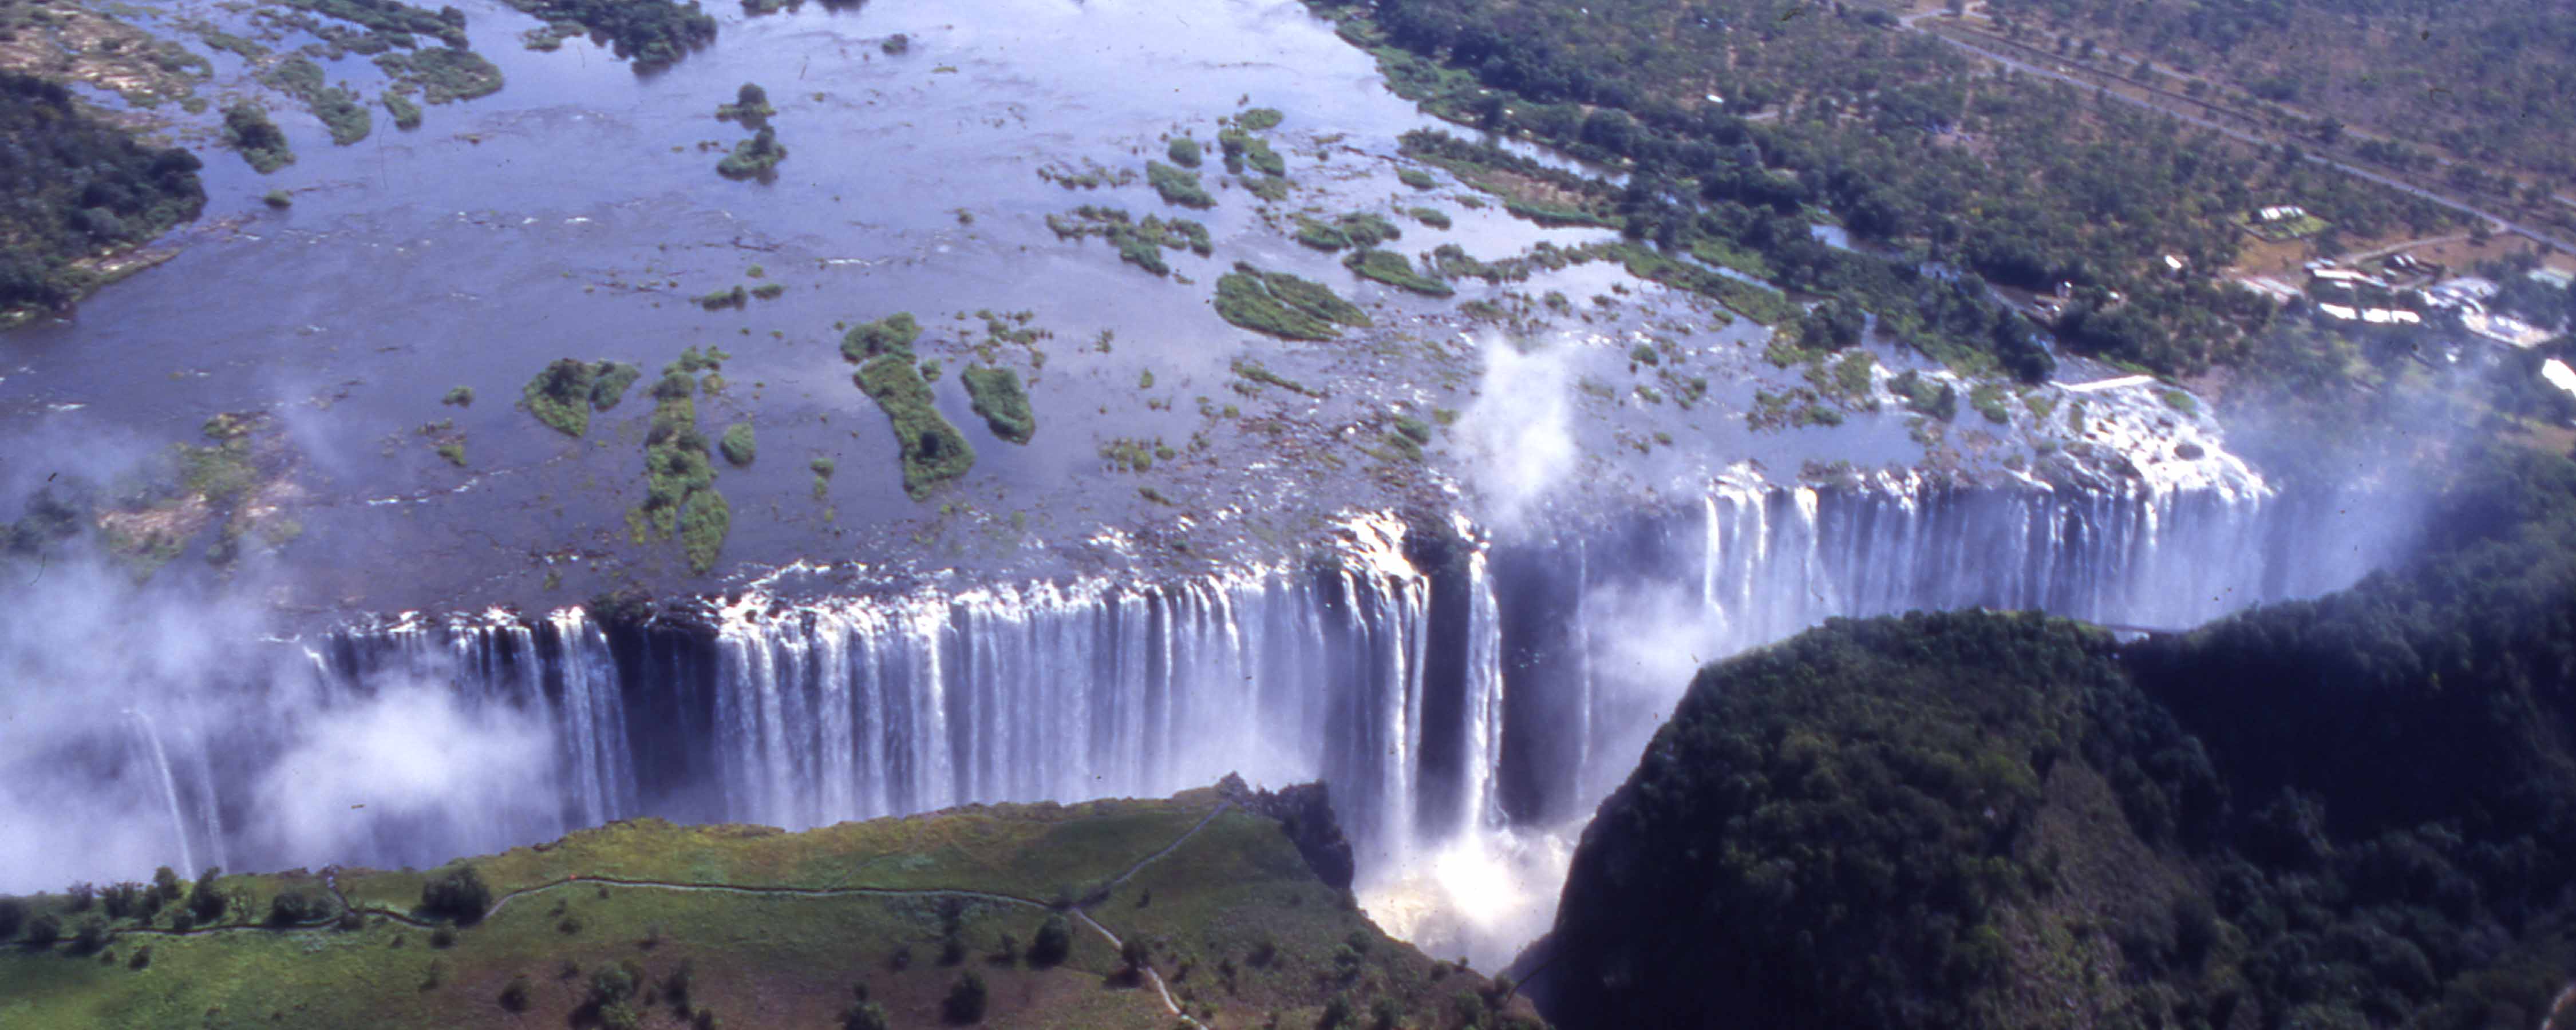 One-stop border post for Vic Falls